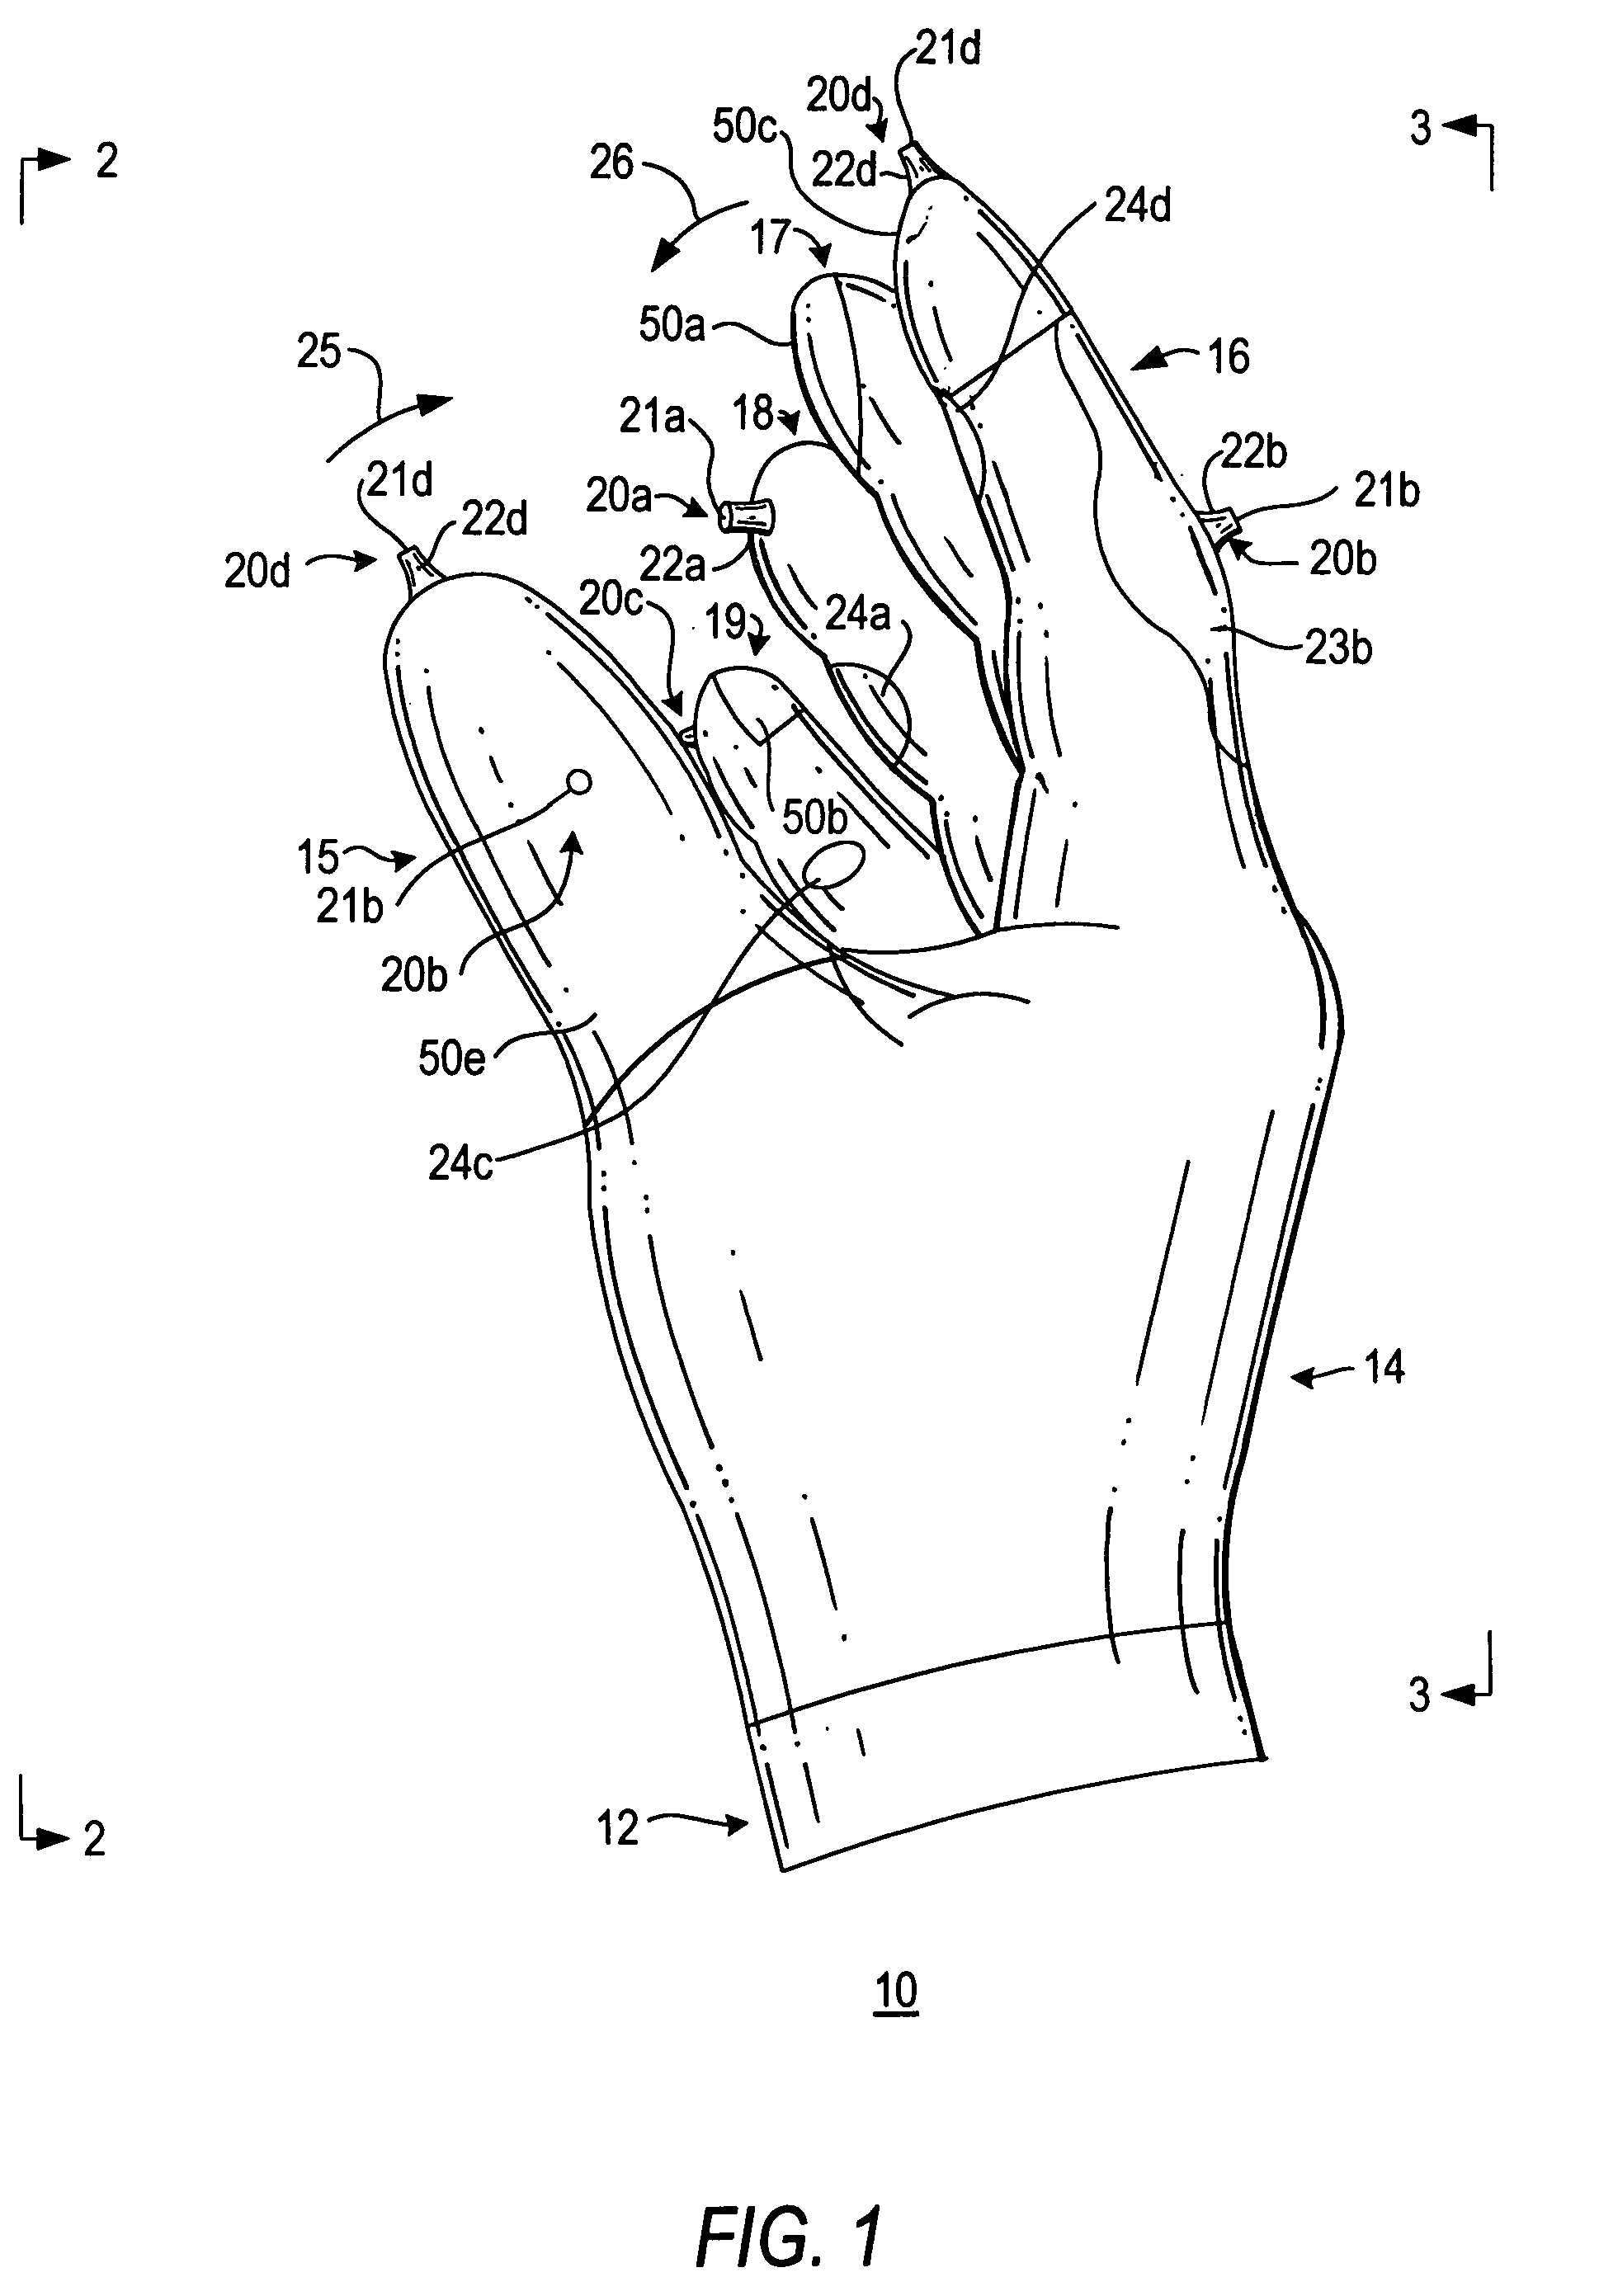 Hand covering features for the manipulation of small devices